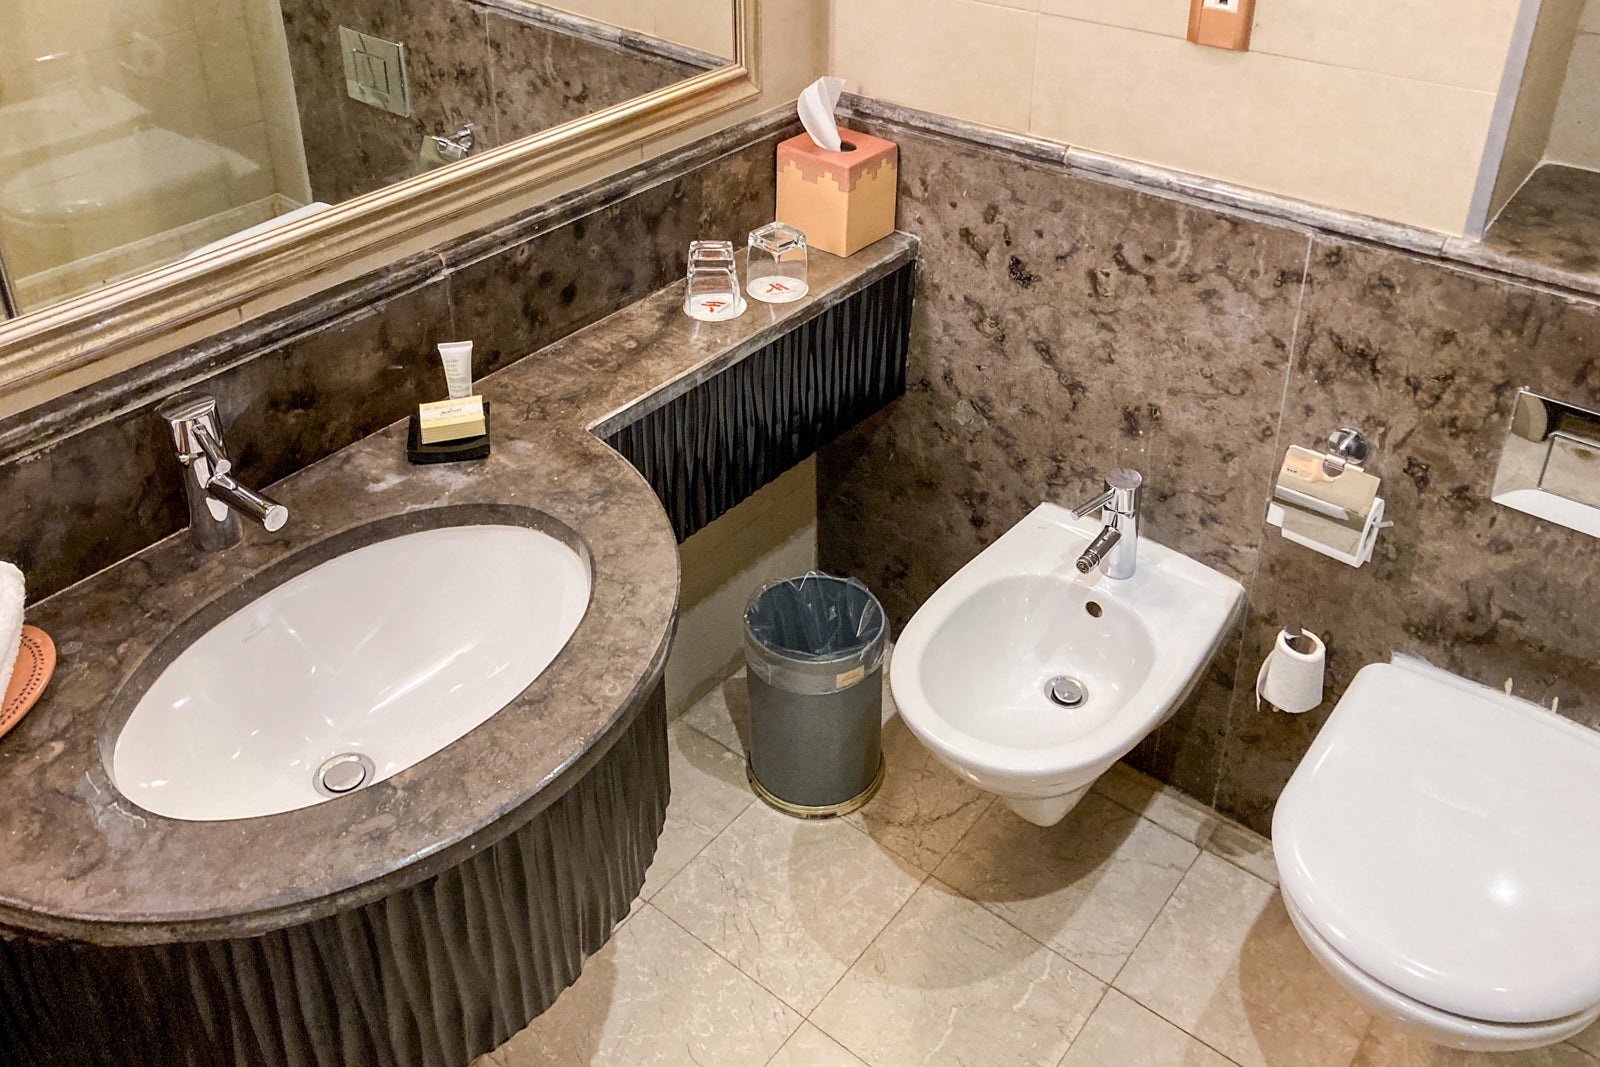 the sink, toilet and bidet in a hotel bathroom